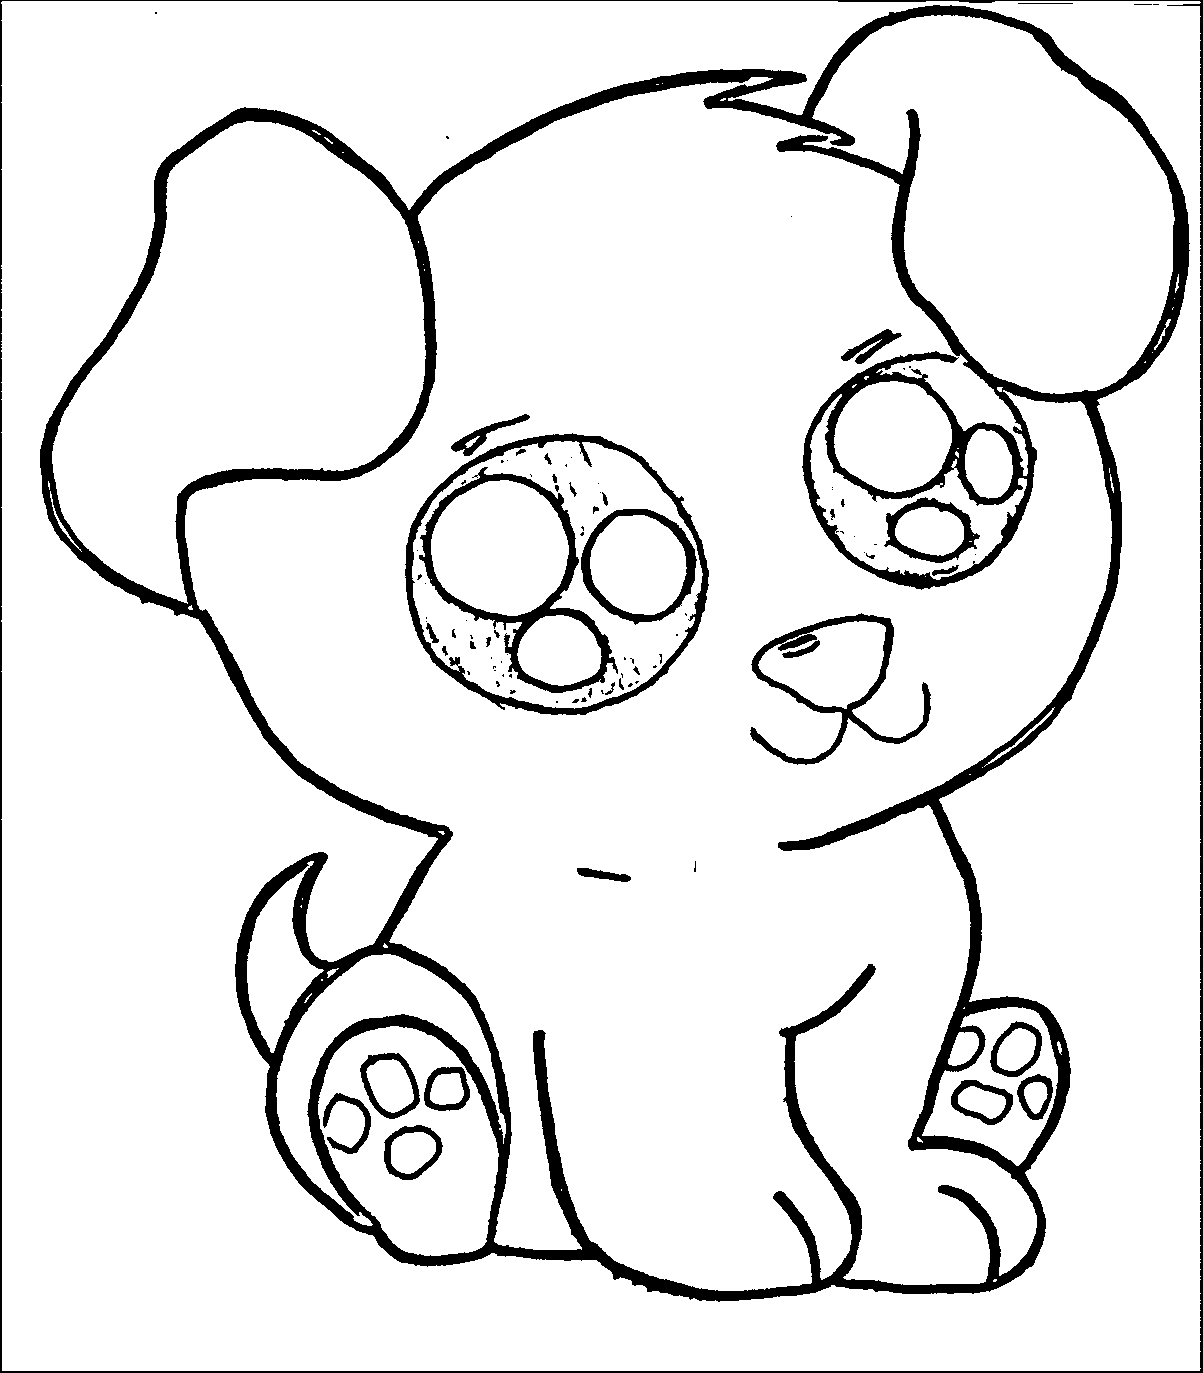 Free Coloring Pages With Cute Puppies, Download Free Coloring Pages